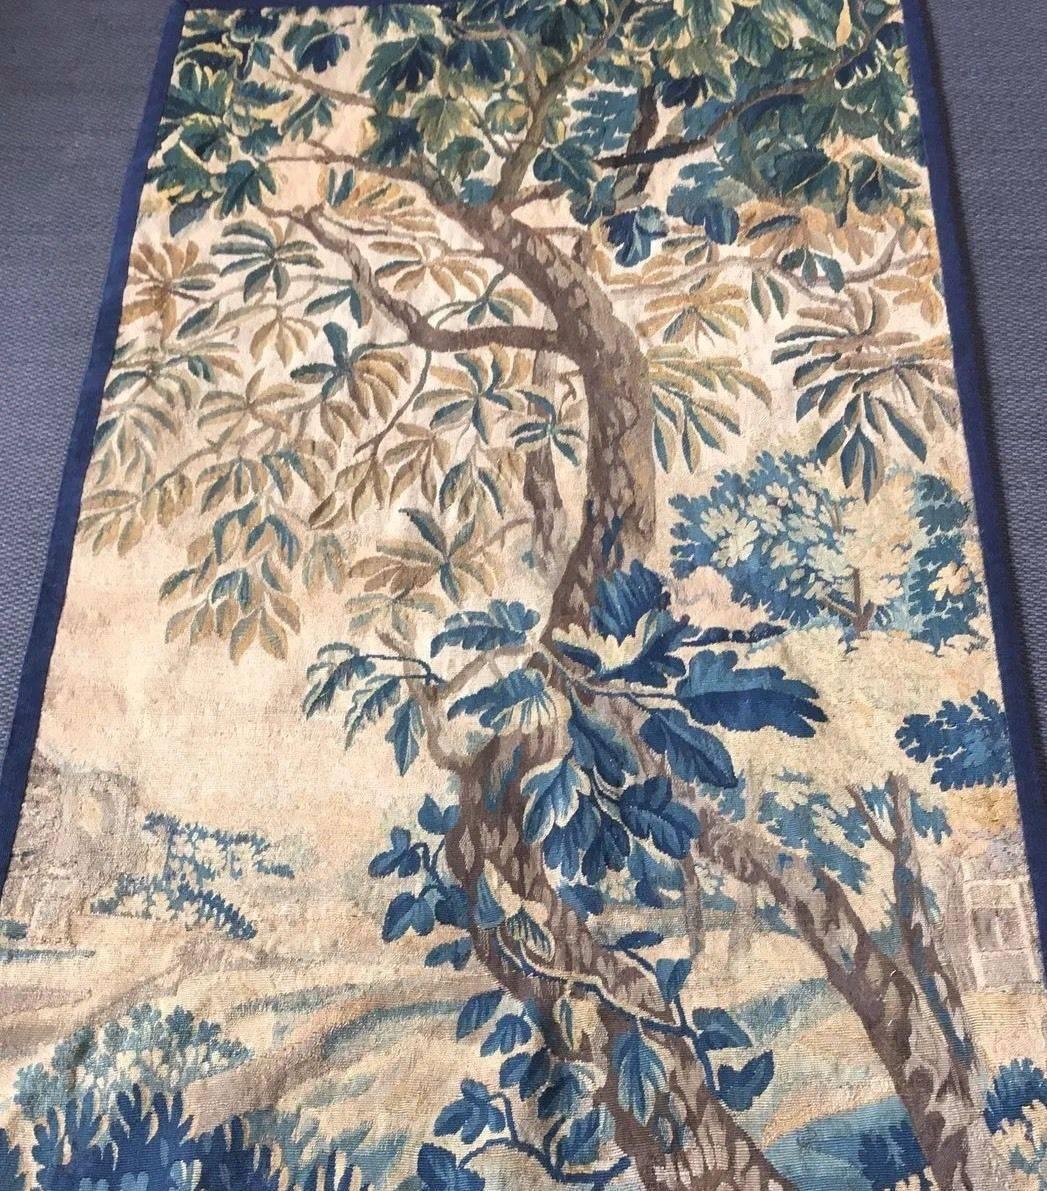 Authentic Brussels tapestry
Early 18th century
After a carton from David Tenier
Depicting a young couple, carrying a basket 
Perfect condition
Blue wool tape border

Silk and wool

Lined and dry cleaned by a restorer.